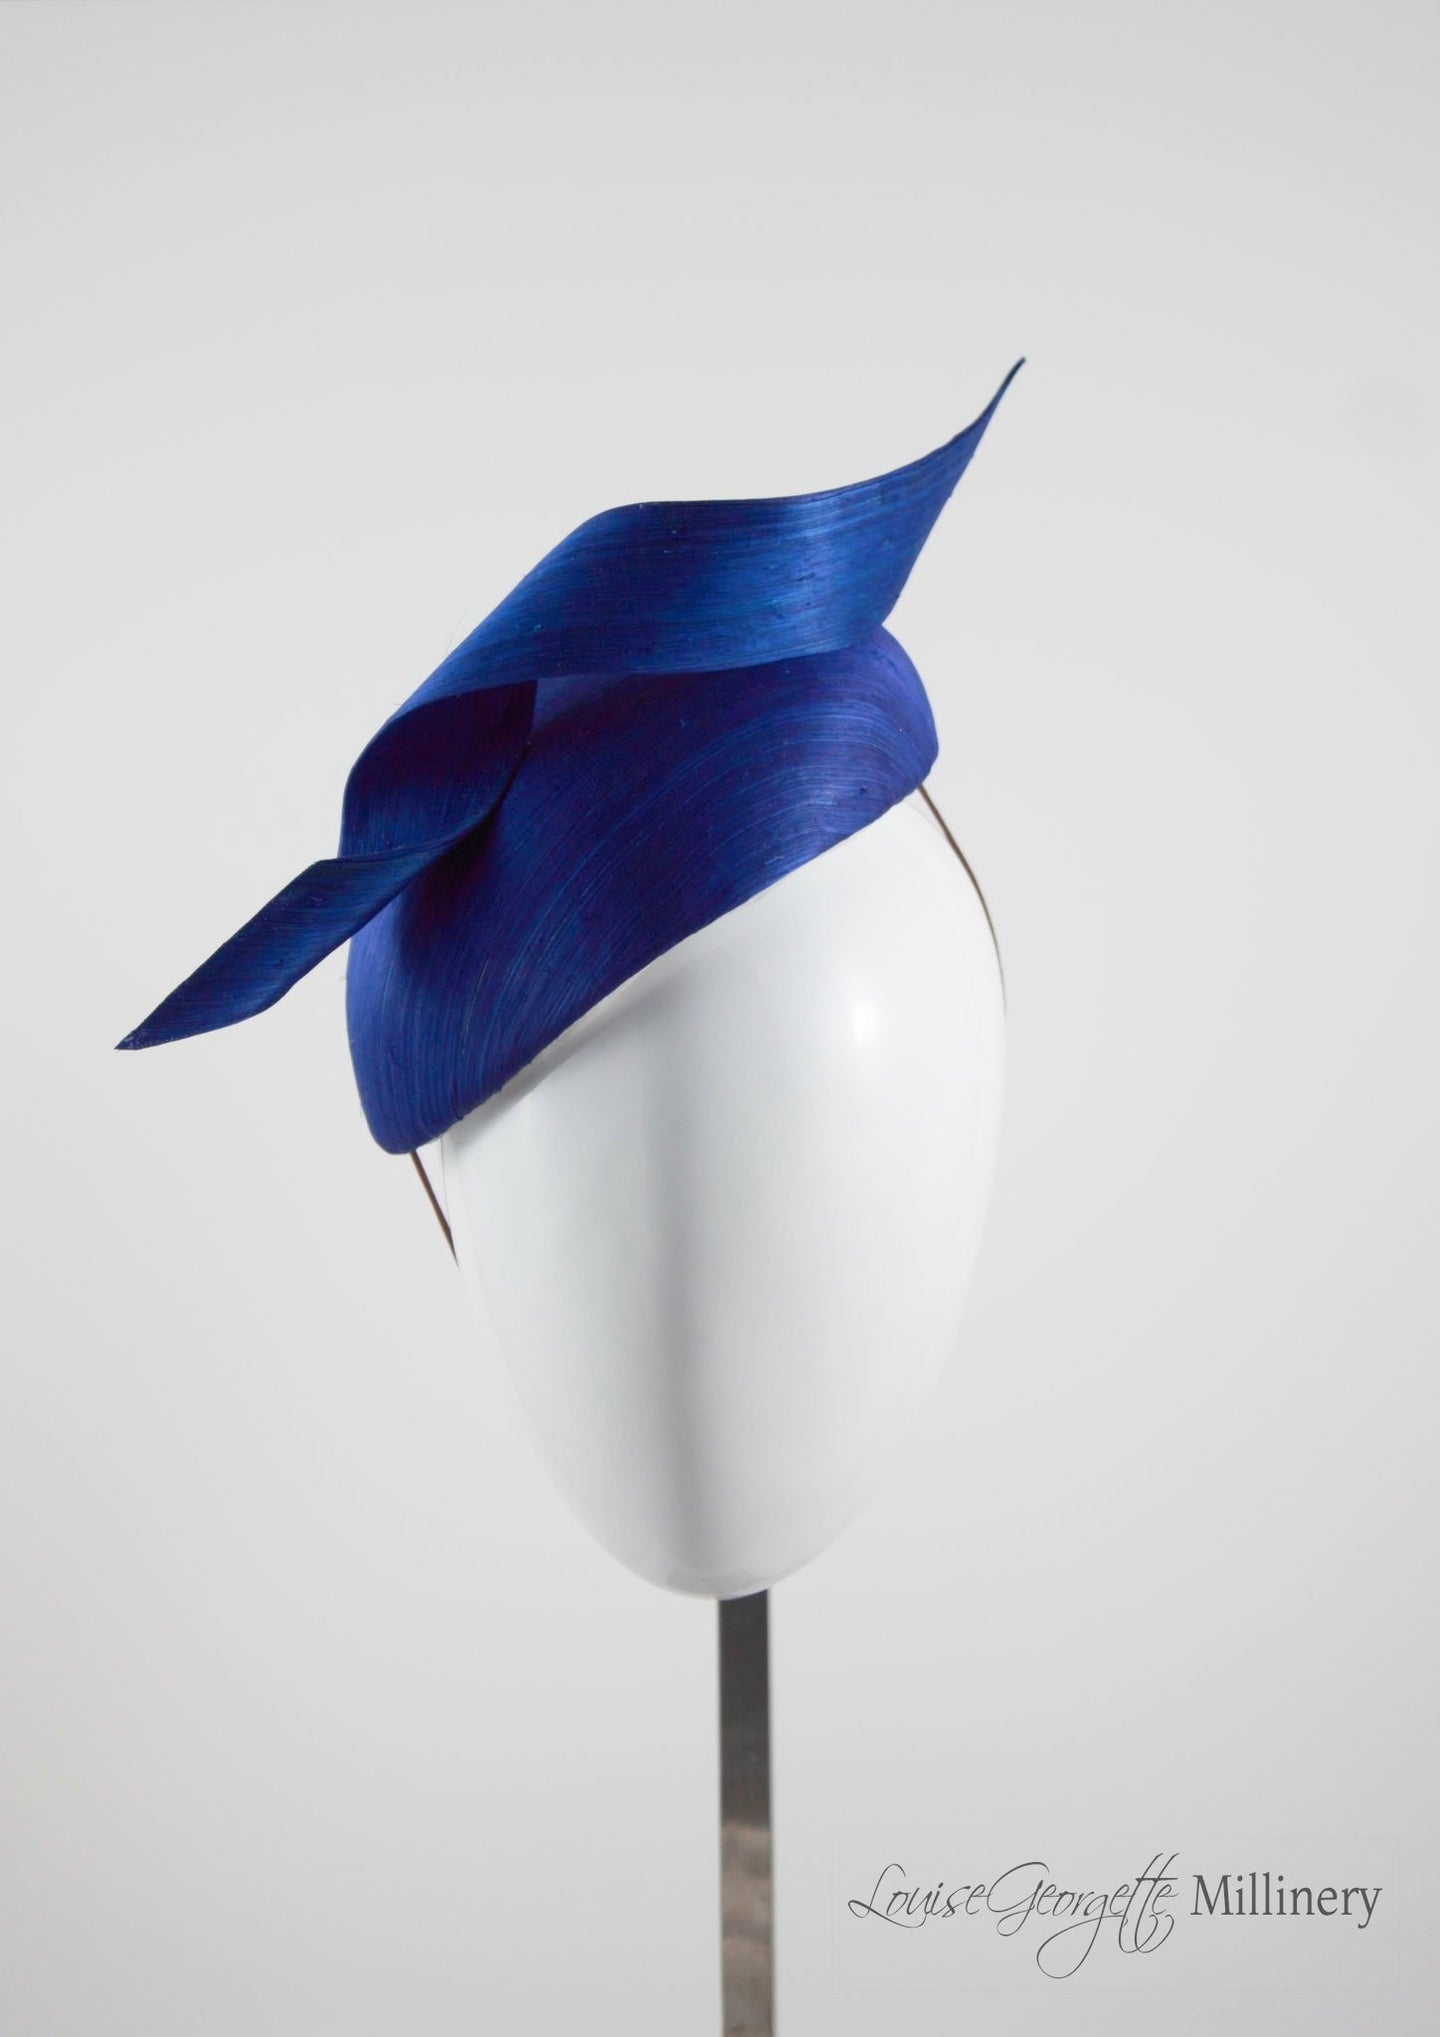 Side view, Silk Navy Beret hat with twist detail. Handmade in London, Millinery suitable for racing, weddings and other special occasions. 